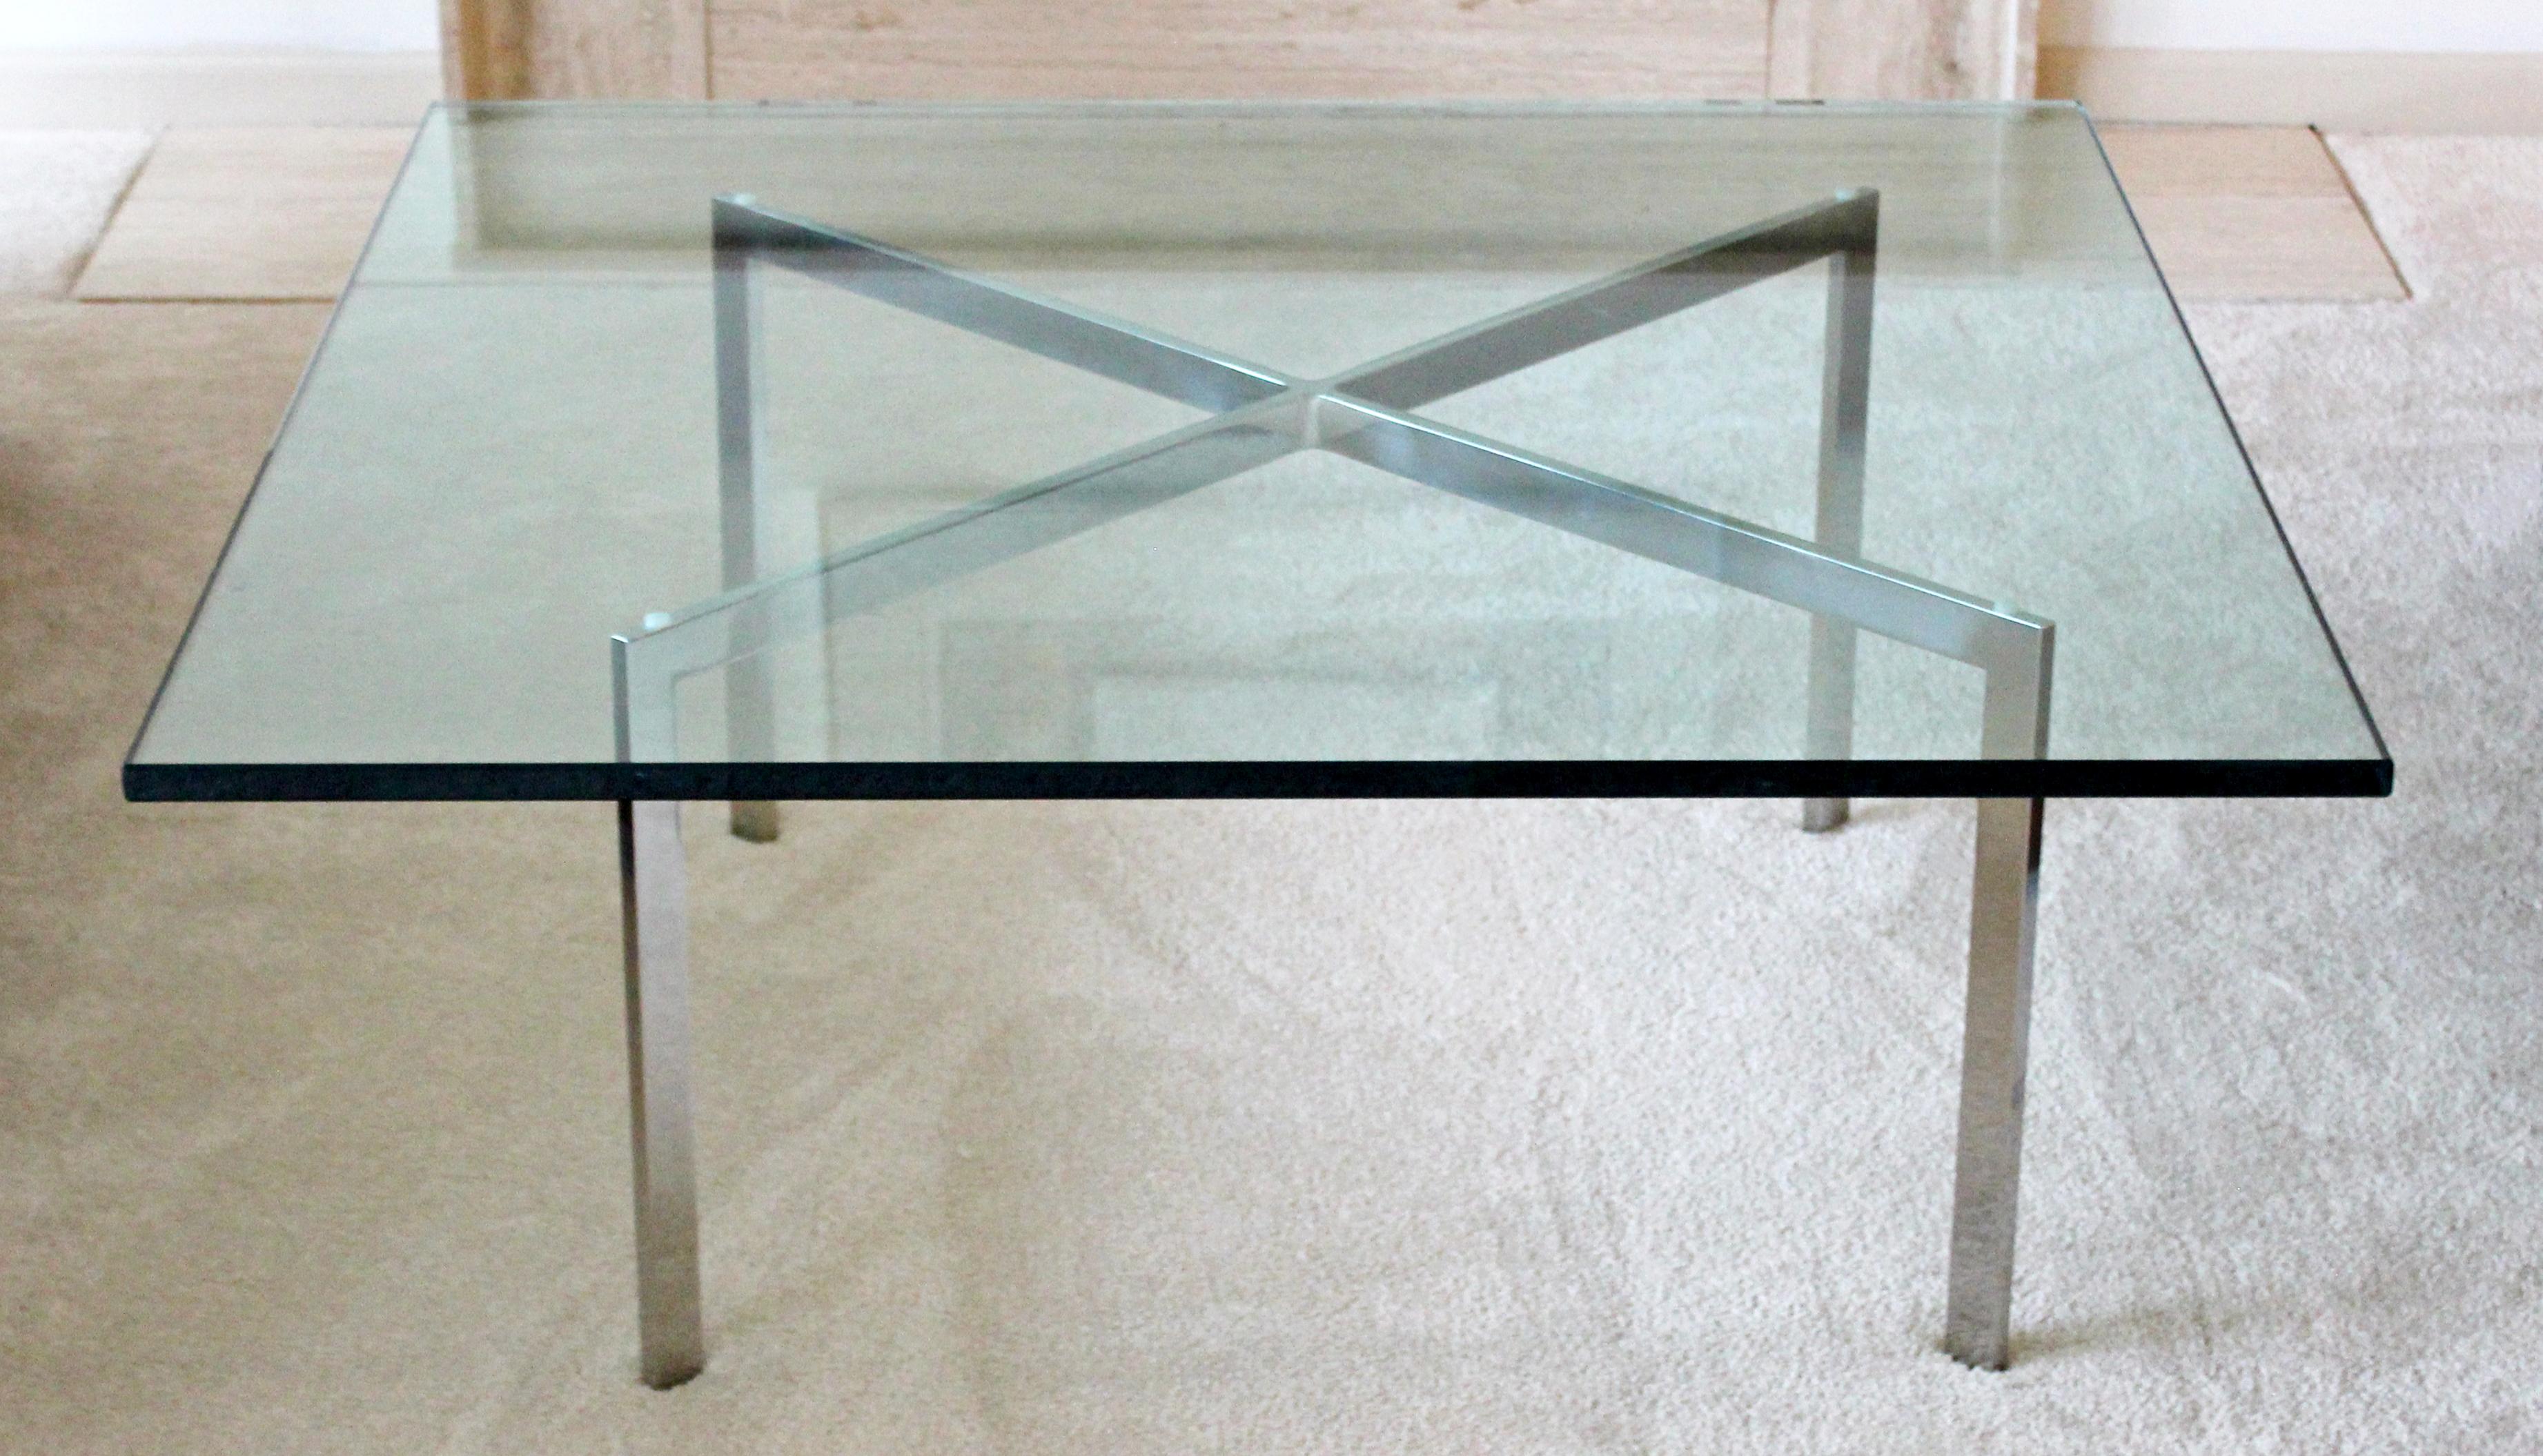 For your consideration is an original Barcelona coffee table, with a square glass top on a stainless steel base, by Ludwig Mies van der Rohe for Knoll, circa the 1970s. In excellent condition. The dimensions are 48